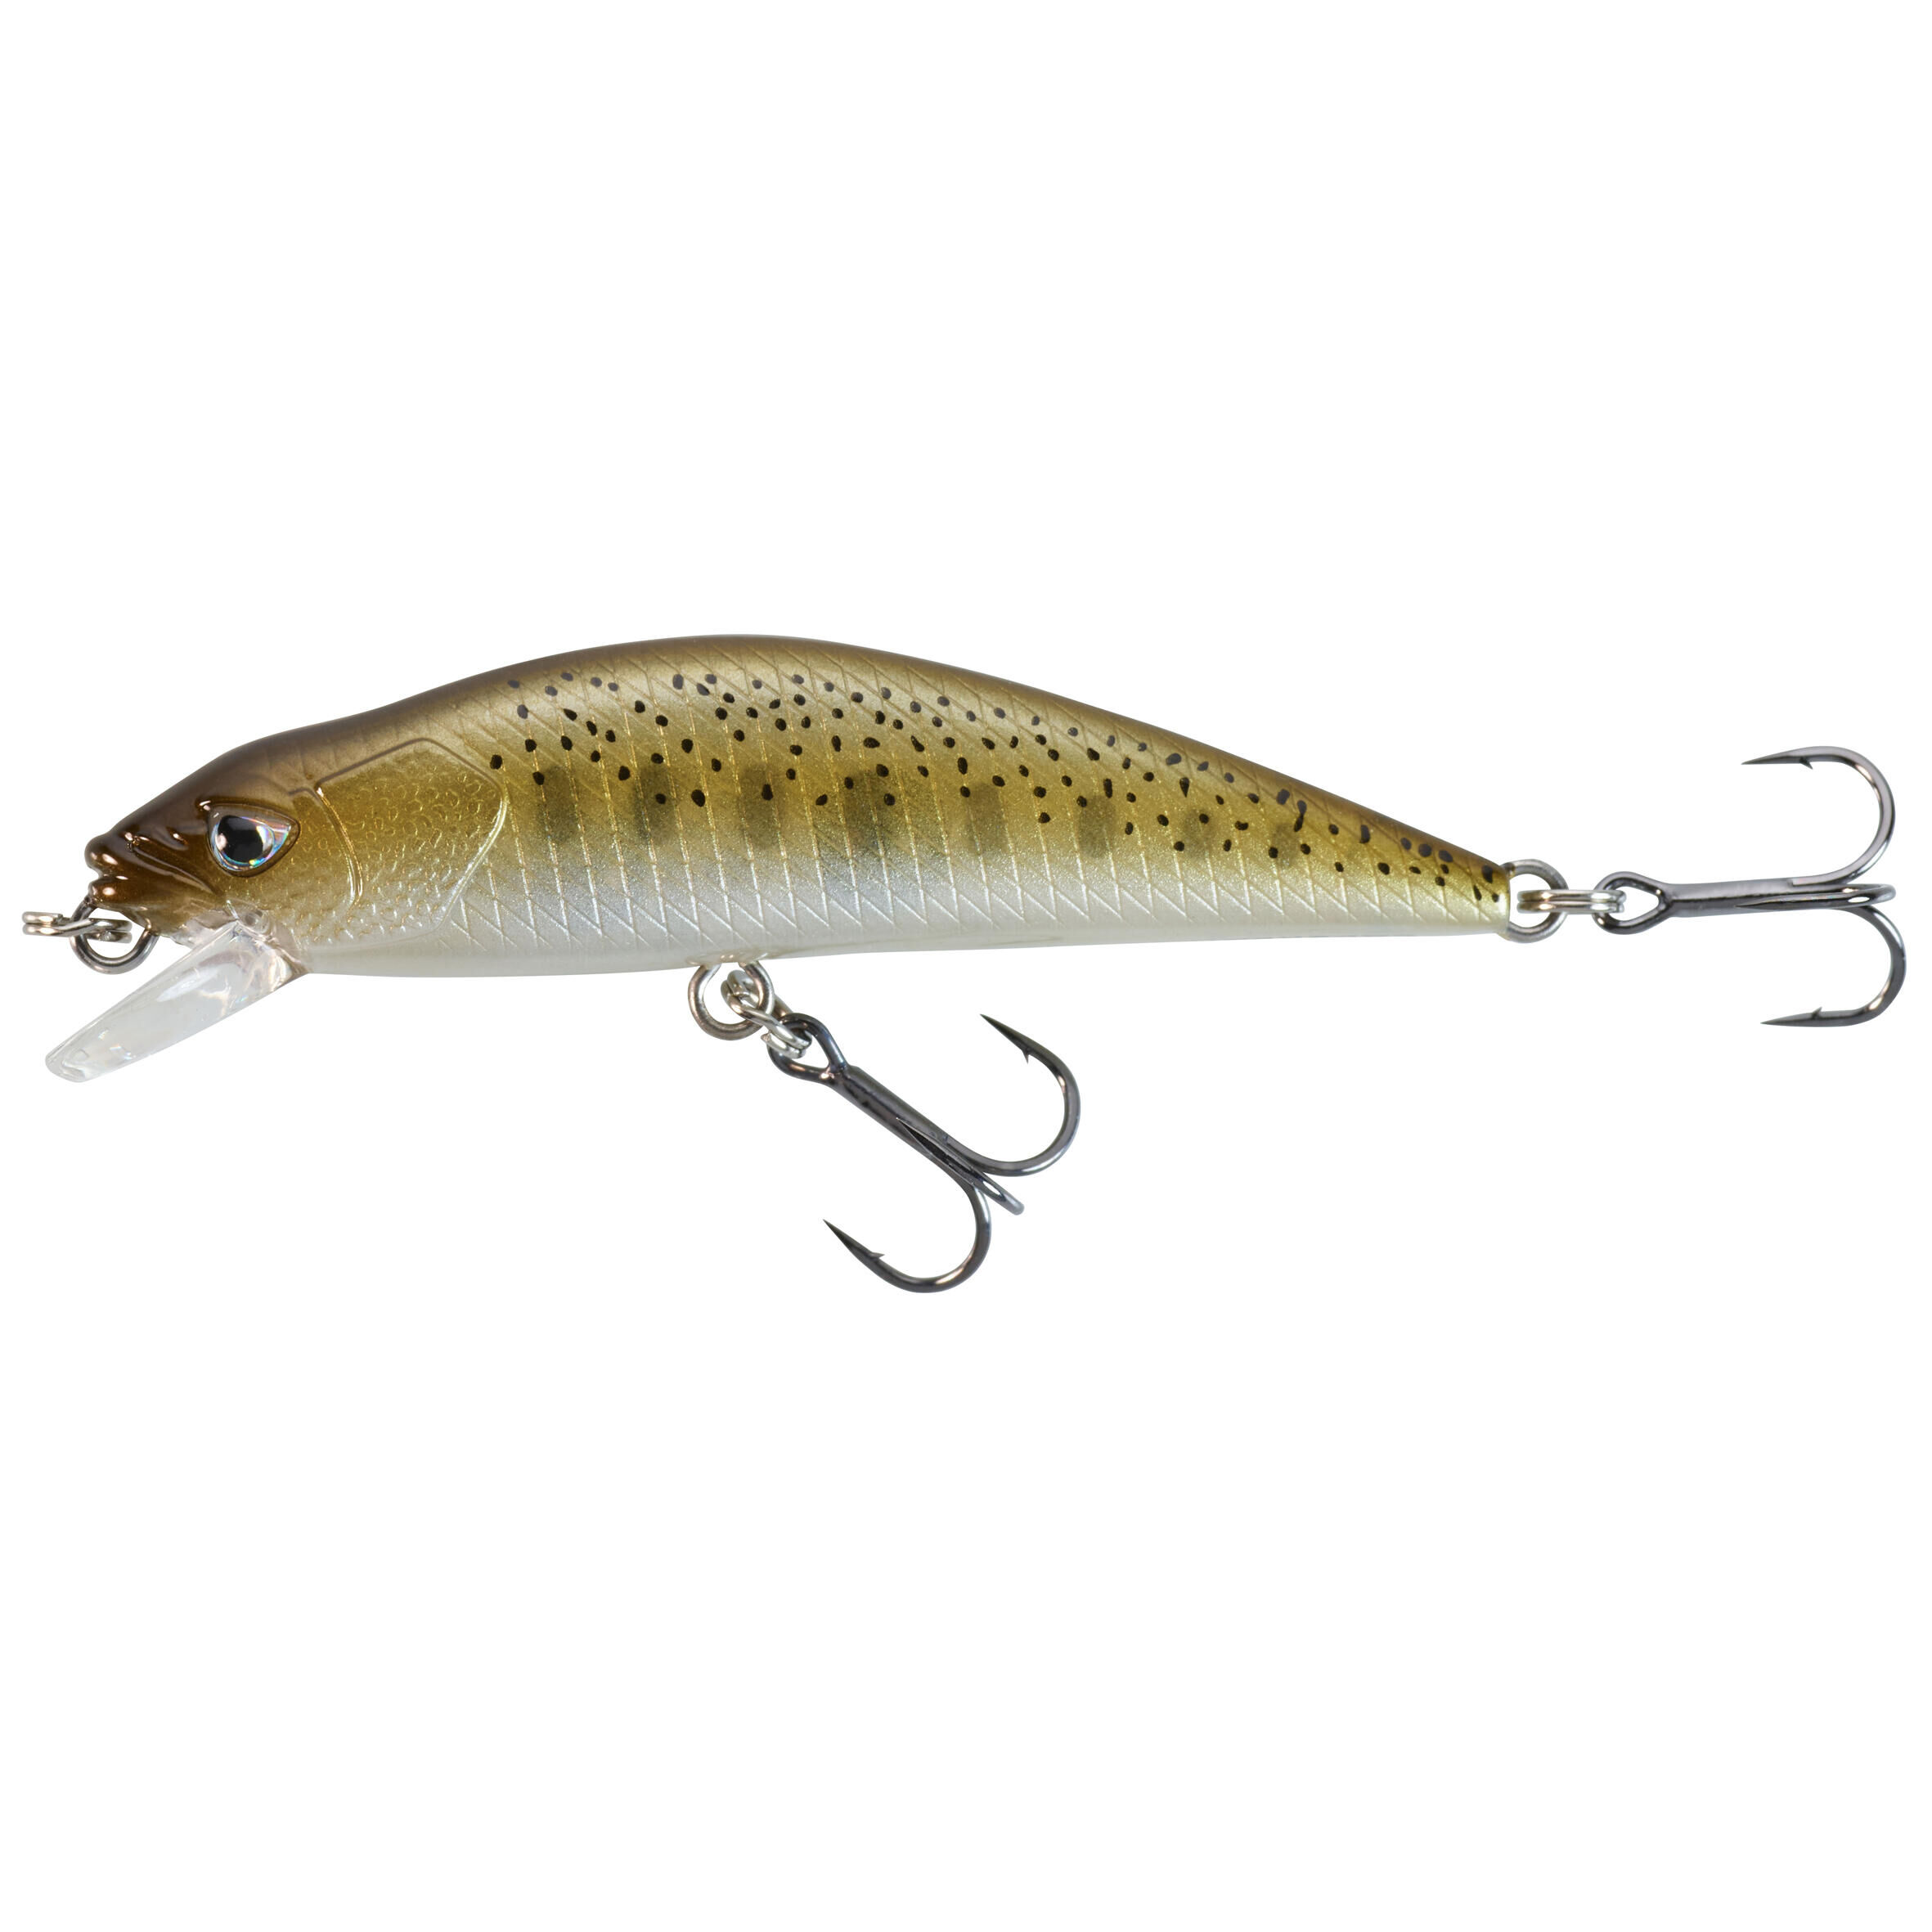 CAPERLAN MINNOW HARD LURE FOR TROUT WXM  MNWFS 65 US YAMAME - BROWN